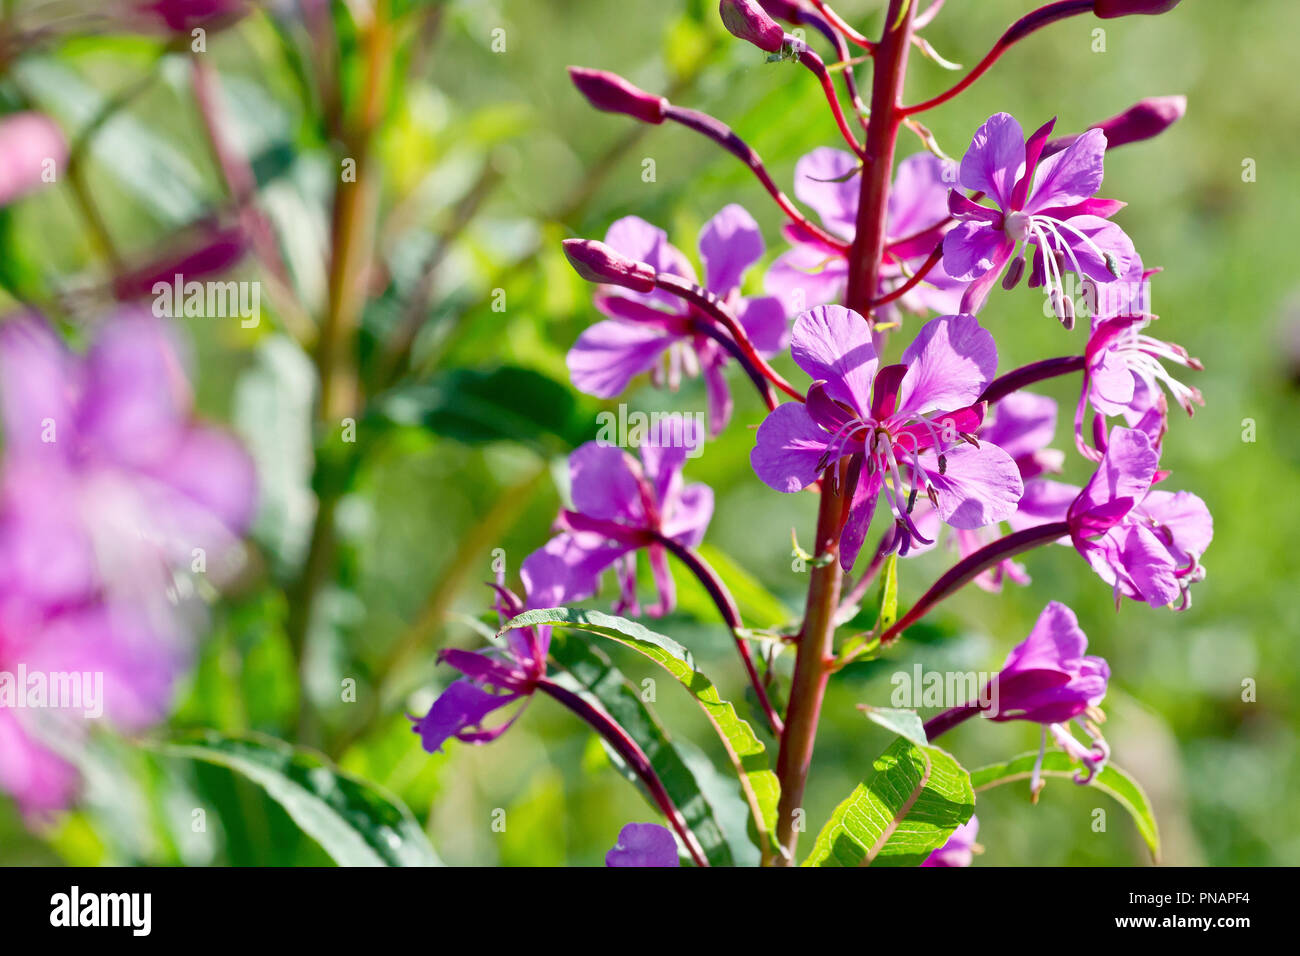 Rosebay Willowherb (epilobium, chamaenerion, or chamerion angustifolium), close up of a group of backlit flowers and buds. Stock Photo